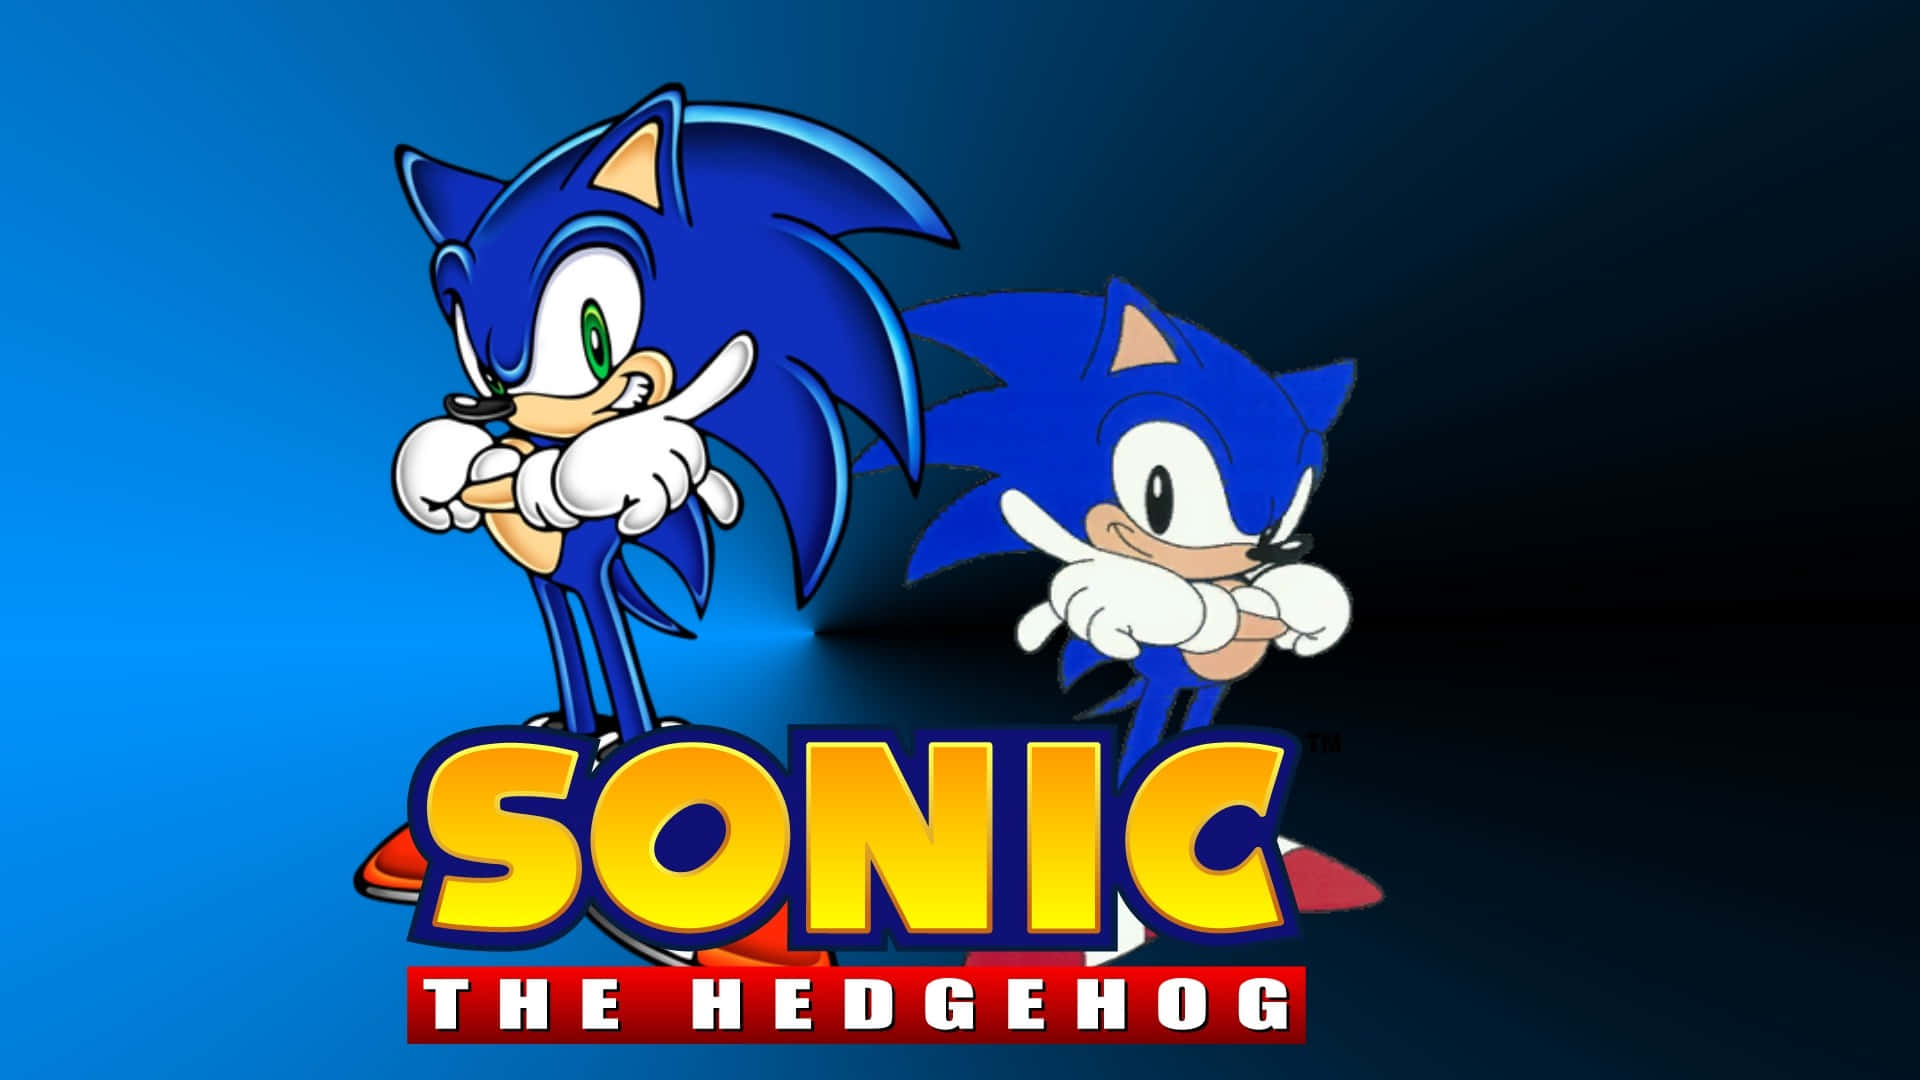 Sonic the Hedgehog in Modern Style Wallpaper